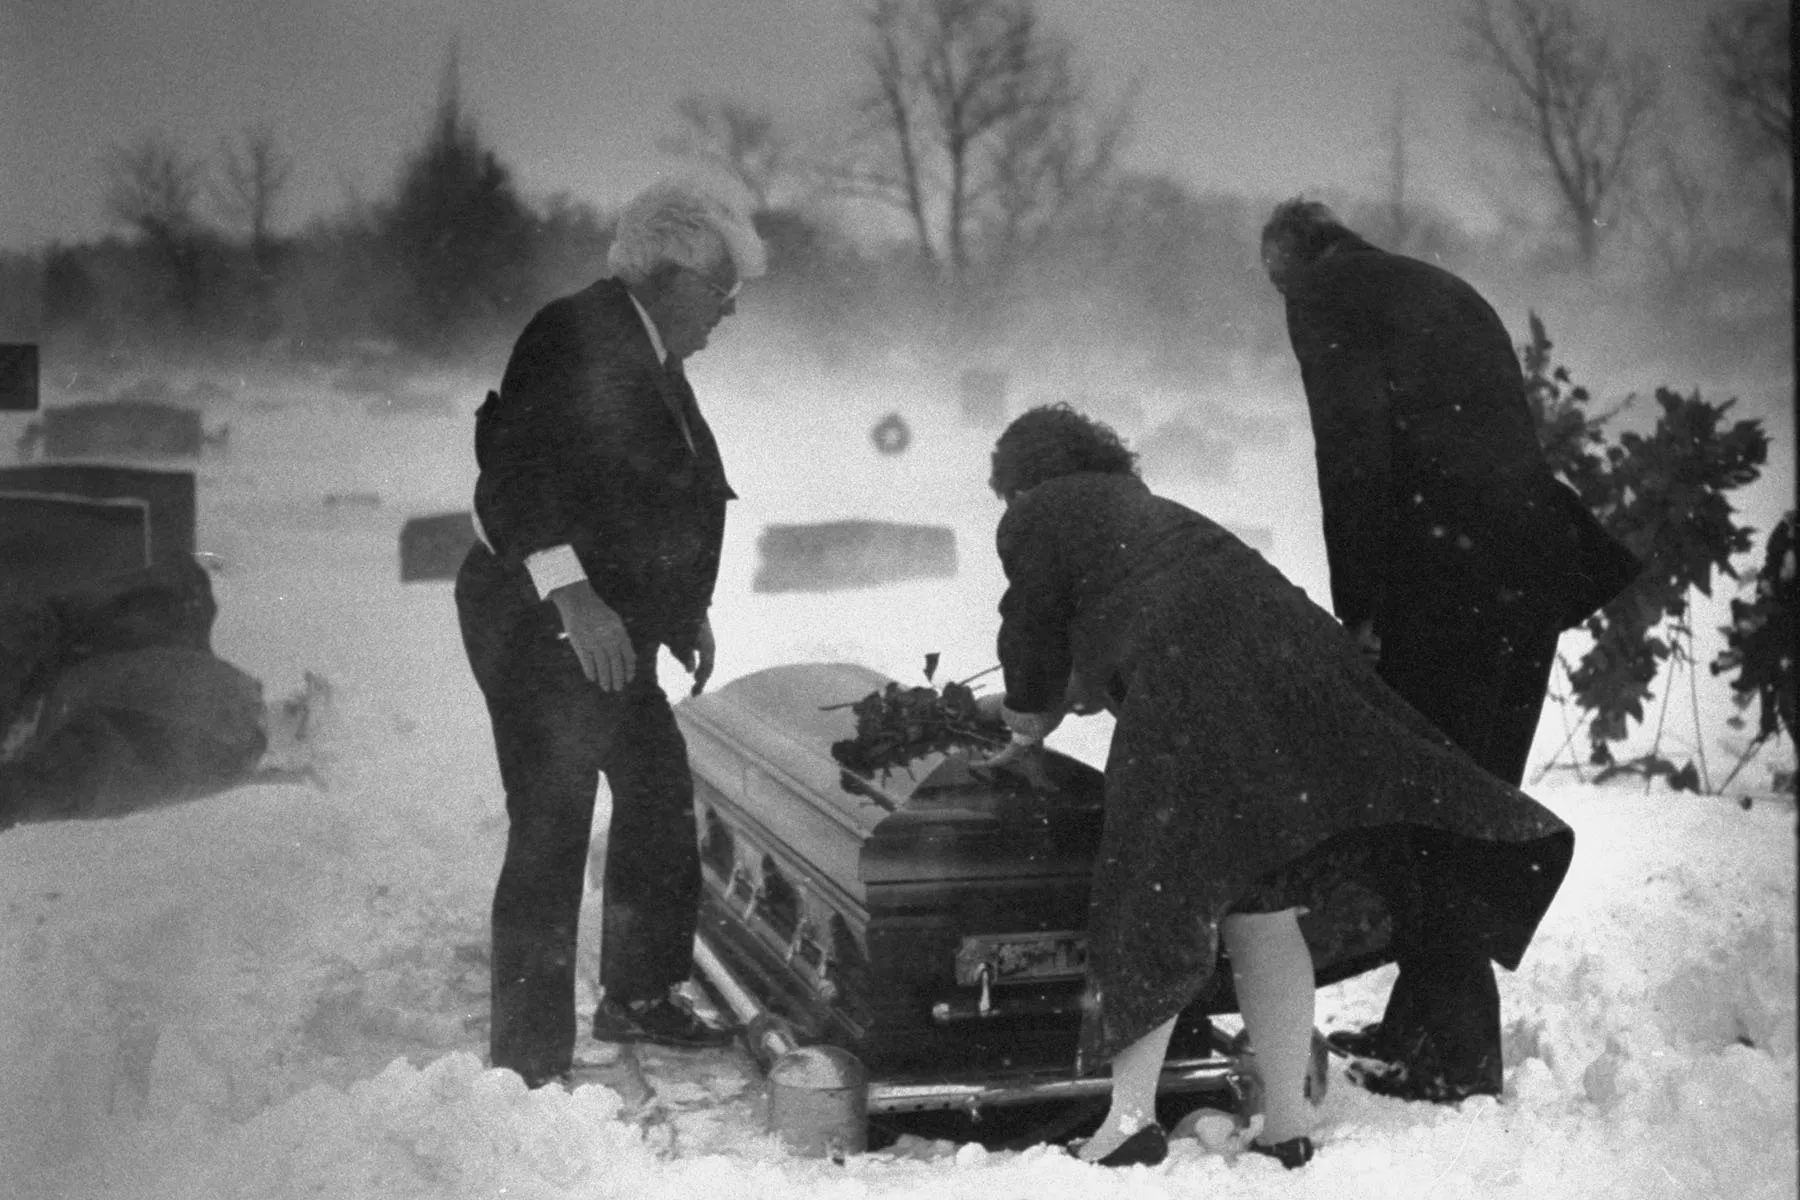 Peter and Maye Gun lay flowers on their son's casket.